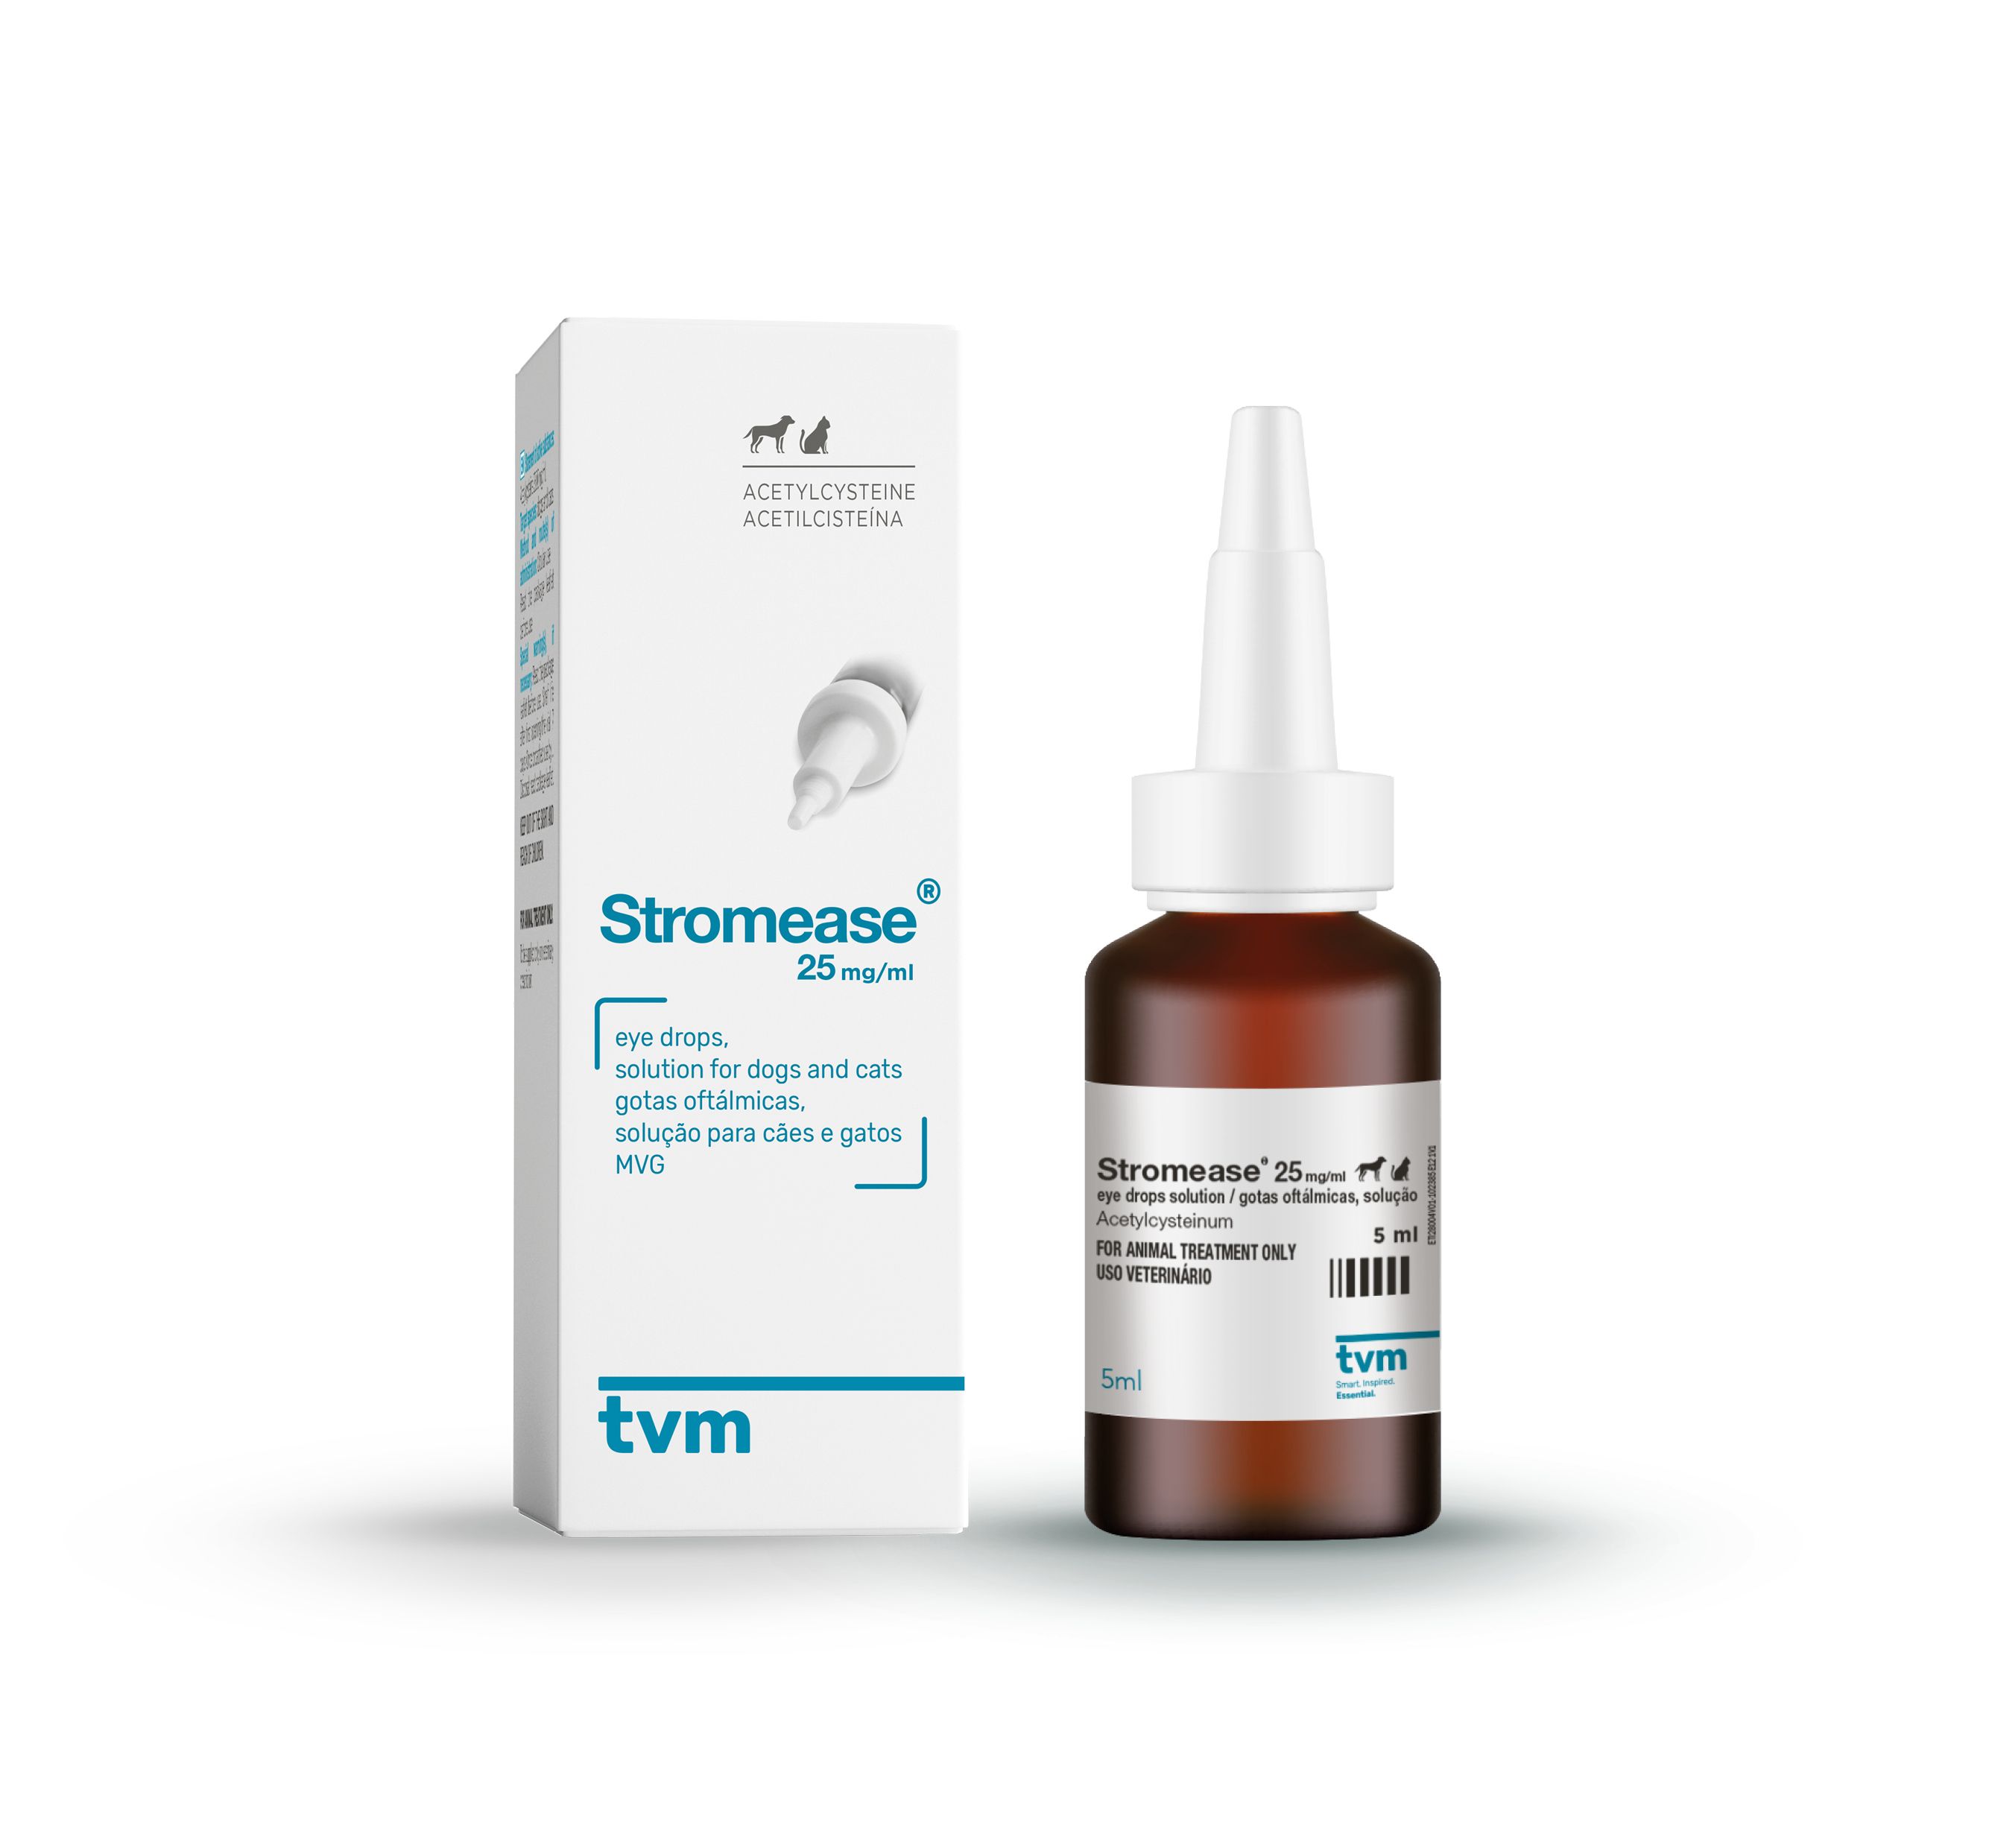 Stromease - A Unique, Licensed Treatment for Corneal Ulcers in Dogs and Cats